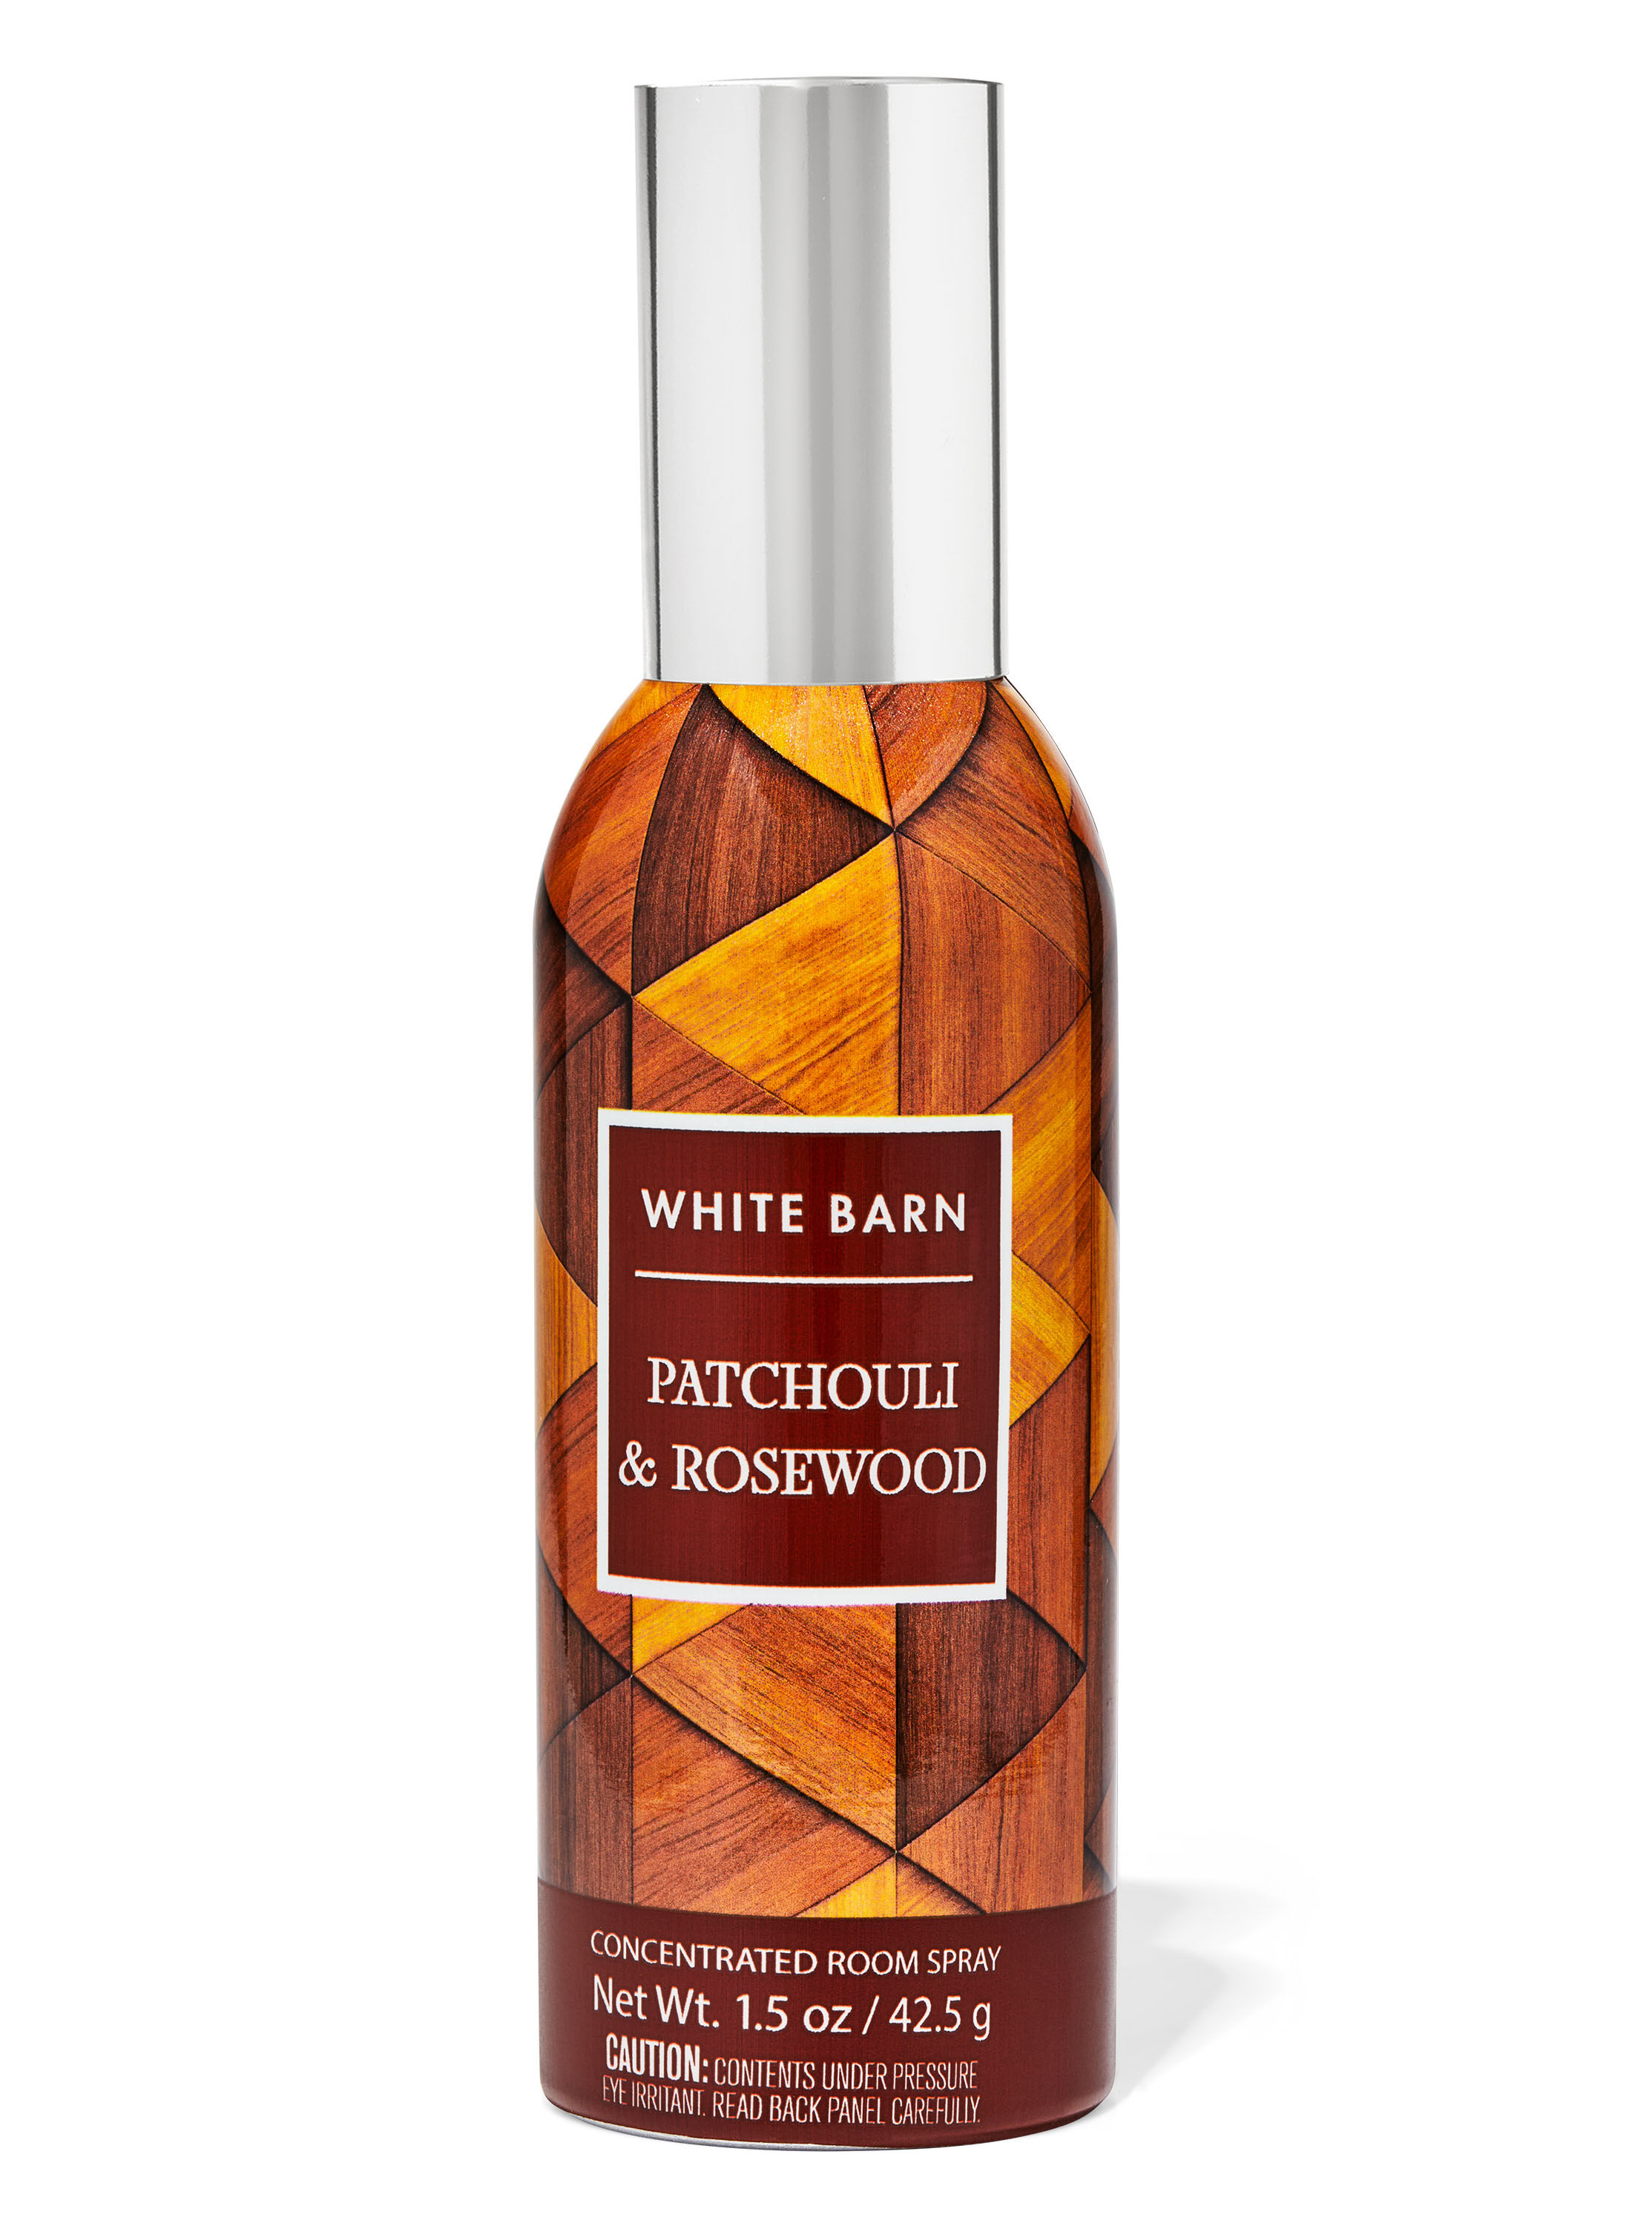 Patchouli & Rosewood Concentrated Room Spray